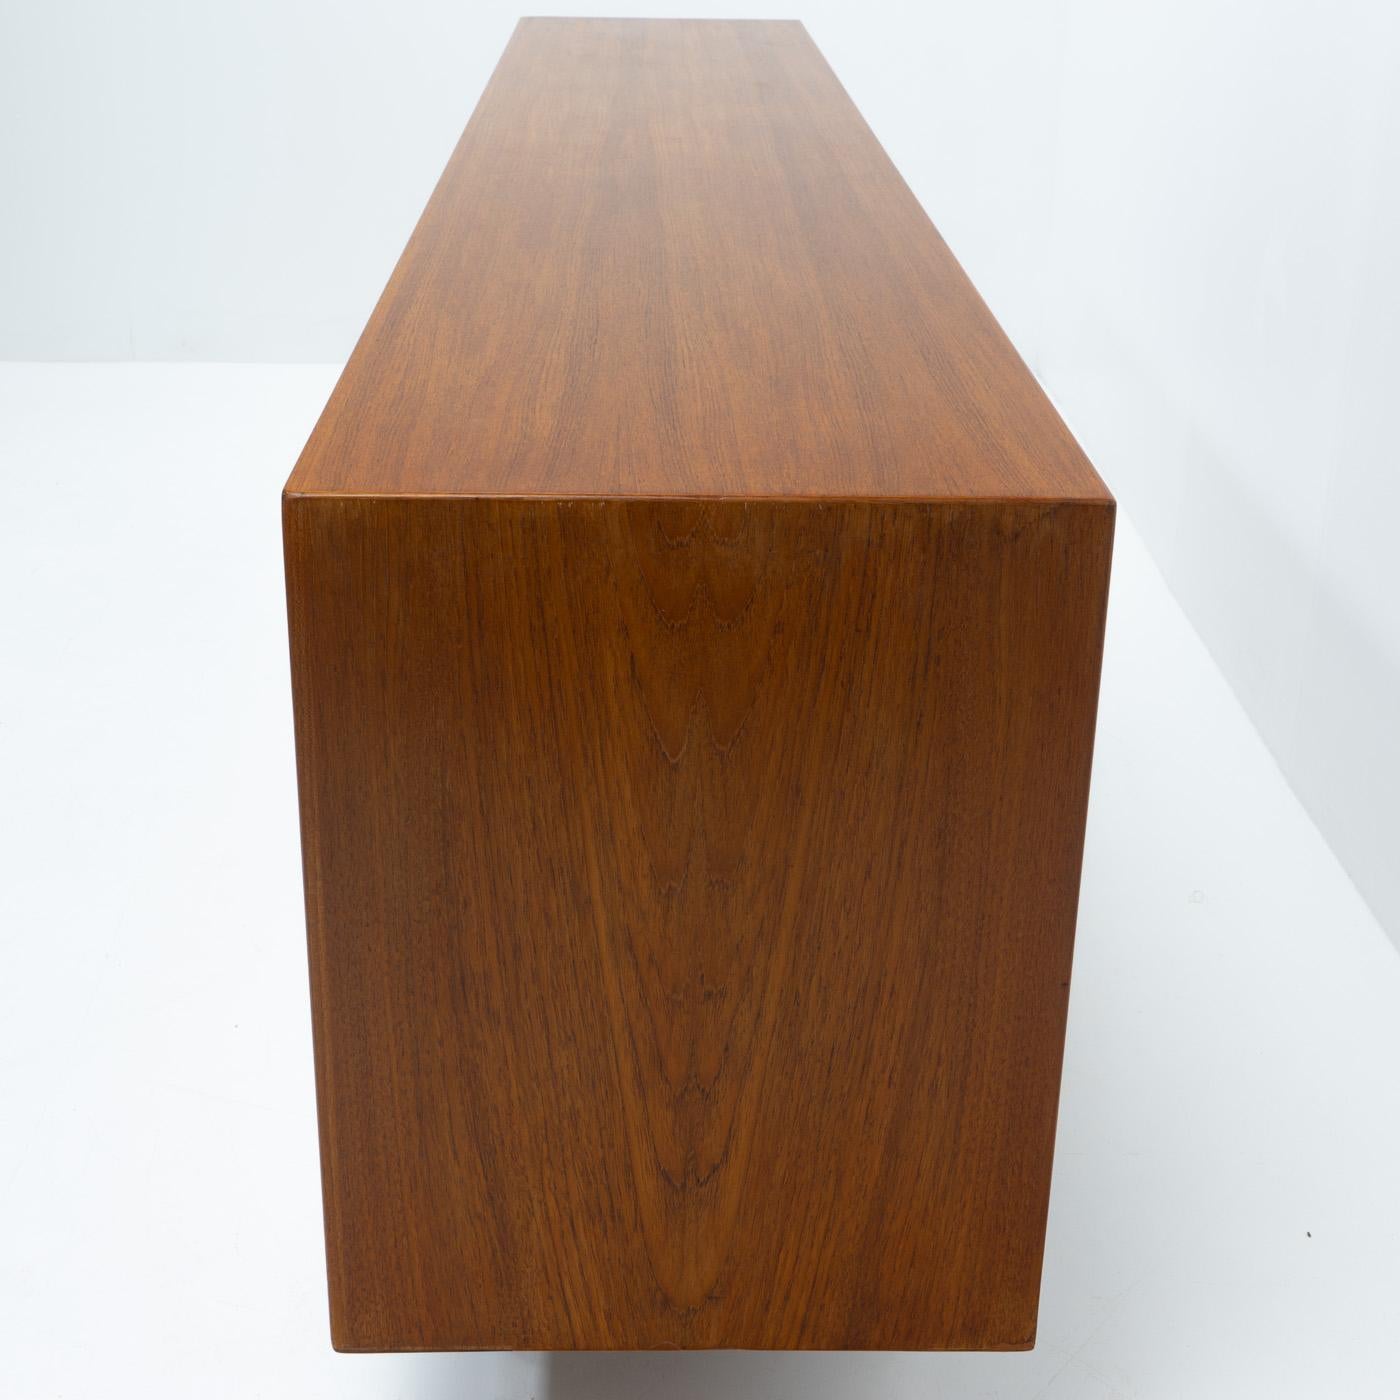 Danish Design Classic Arne Voder for Sibast, Triennale Sideboard, 1950s For Sale 2